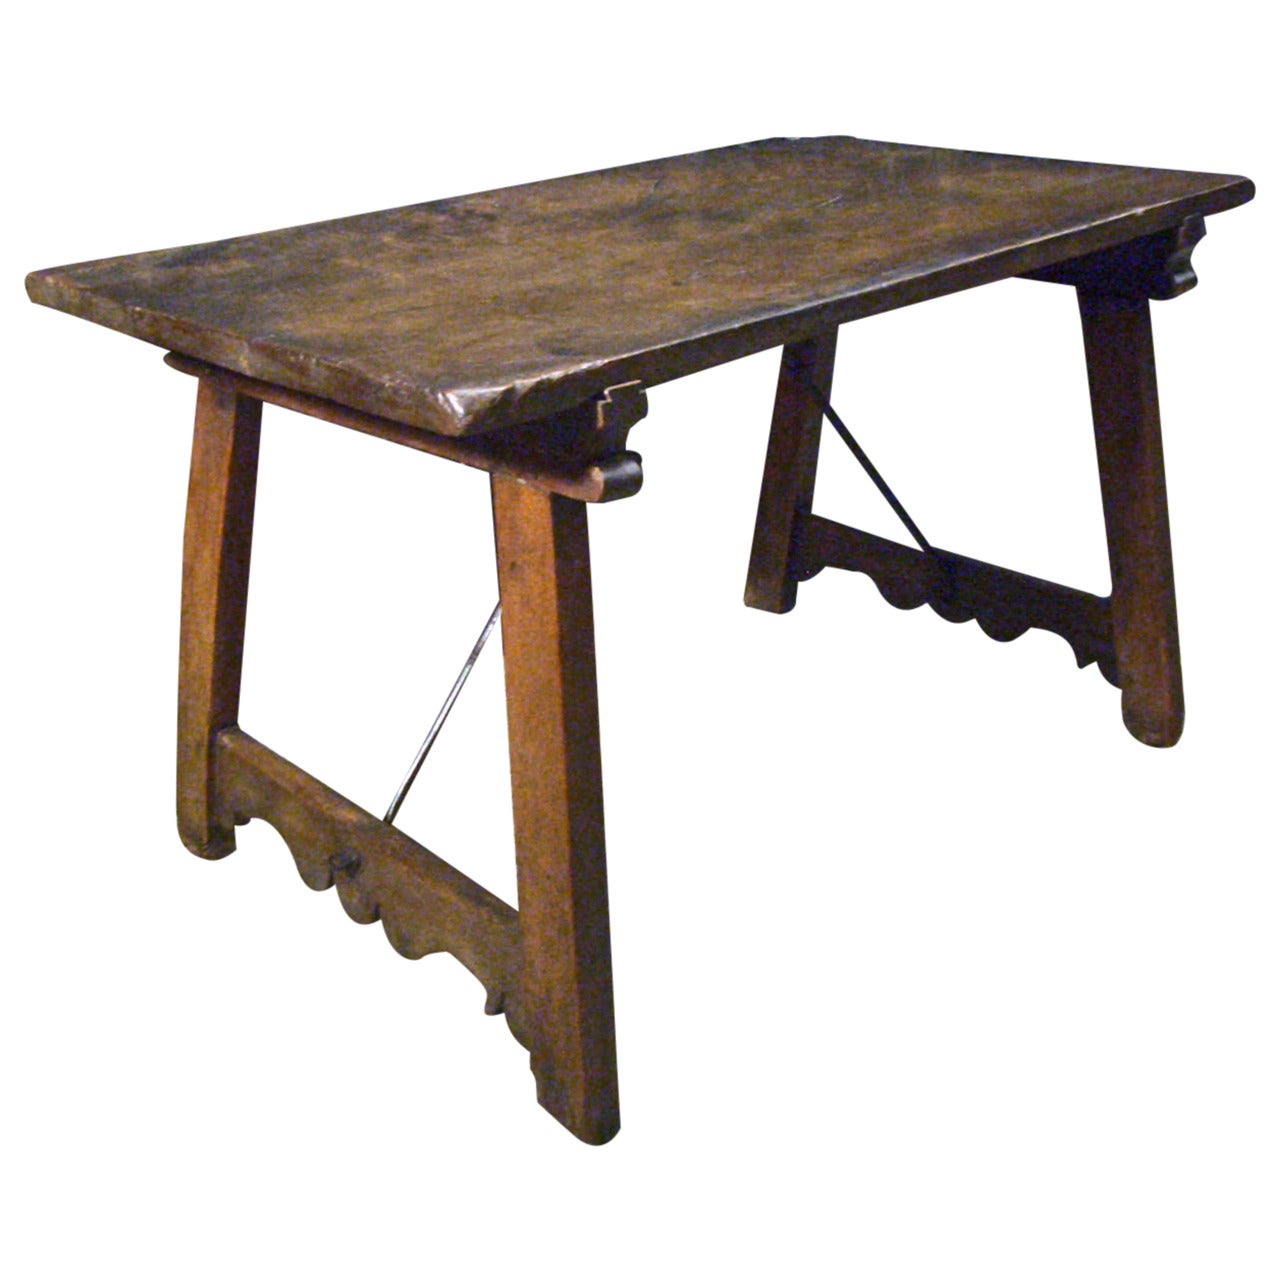 Spanish Table or Desk